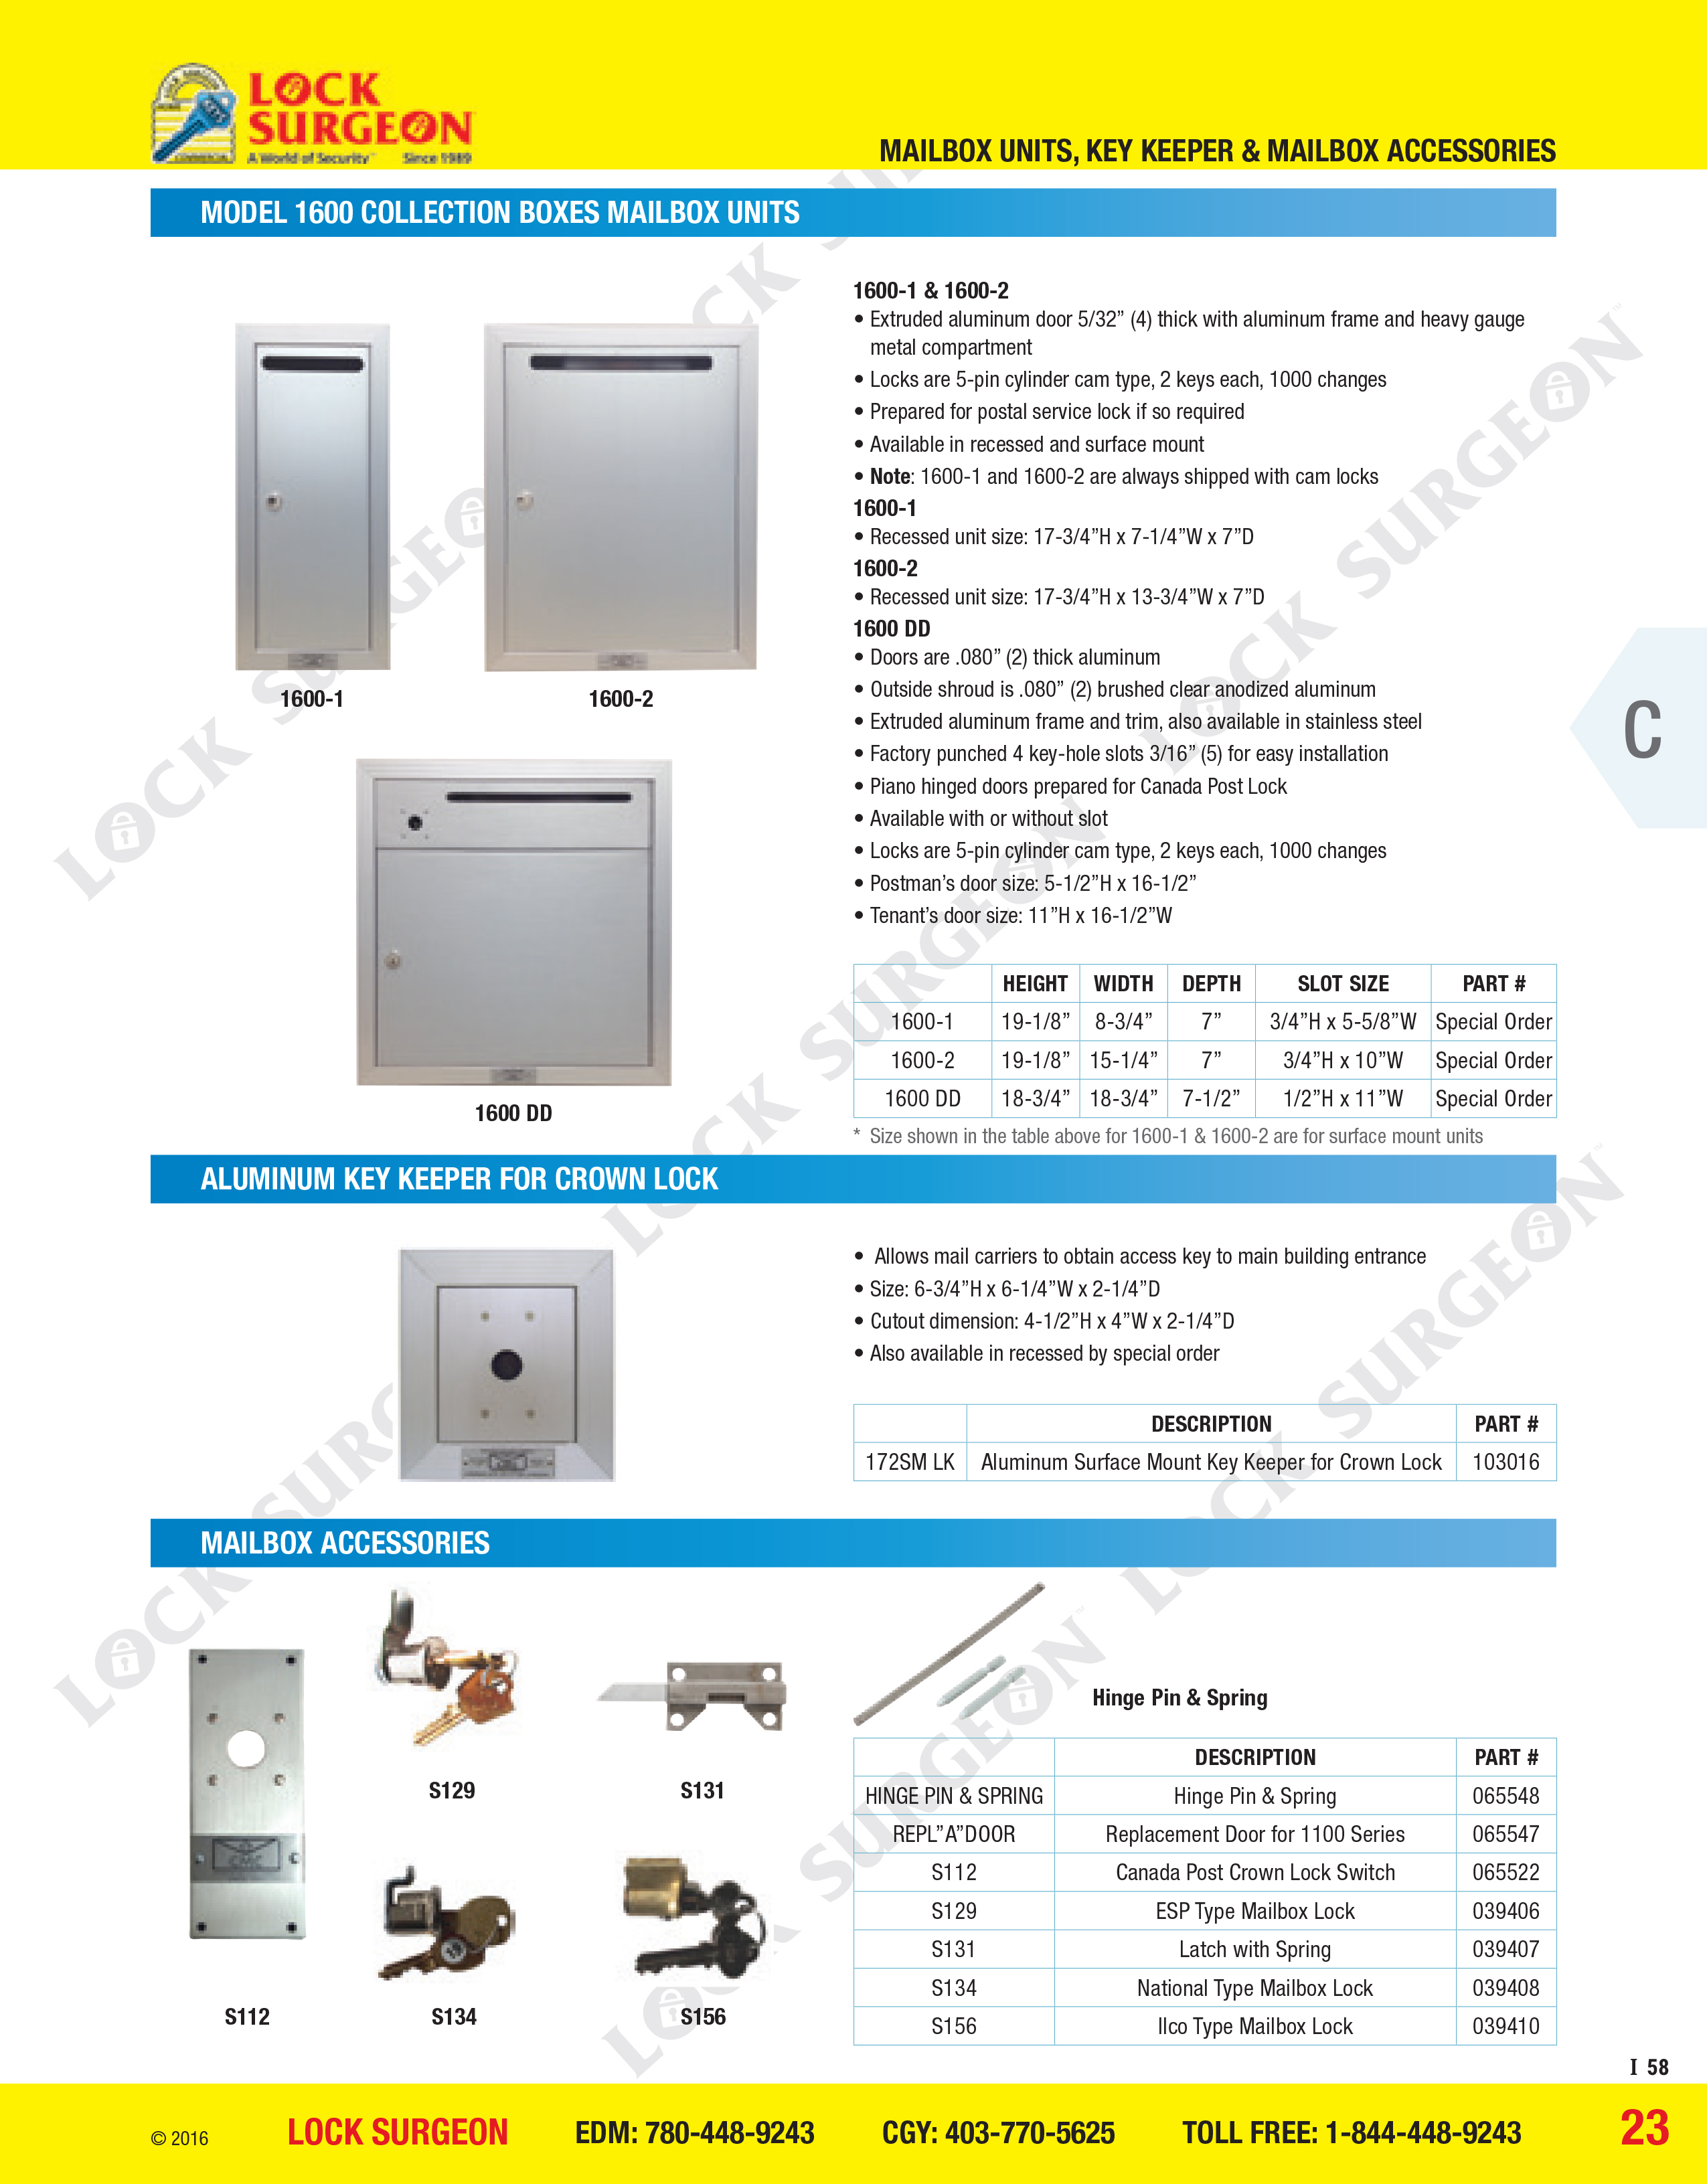 Acheson Model 1600 collection mailbox units aluminium key keeper for crown lock Mailbox accessories.